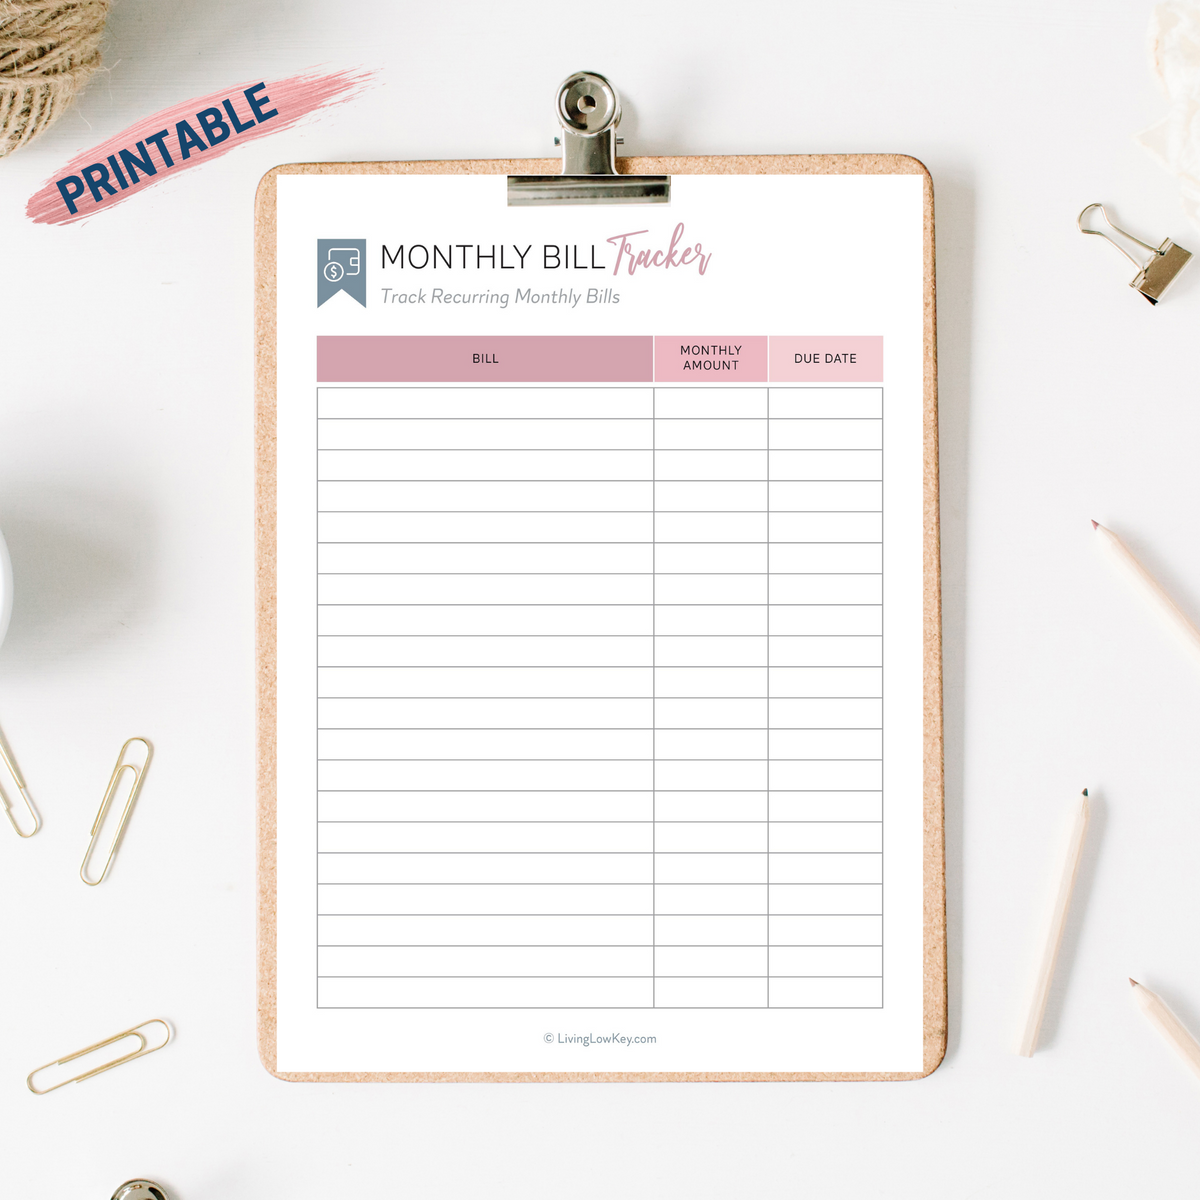 Printable Monthly Bill Log  Organizing monthly bills, Paying bills, Bills  printable